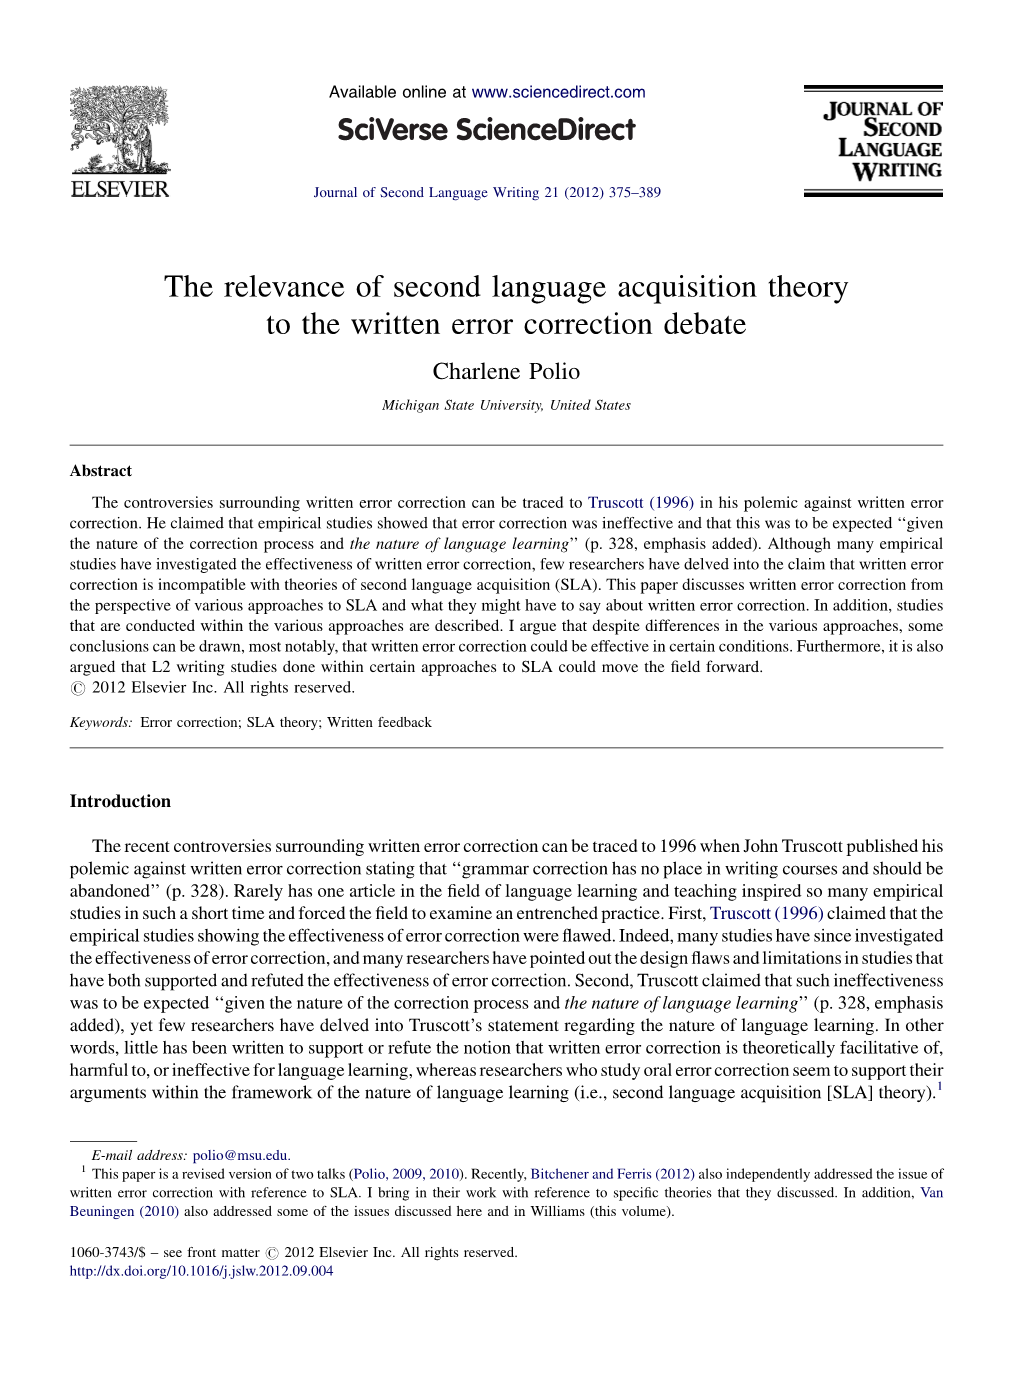 The Relevance of Second Language Acquisition Theory to the Written